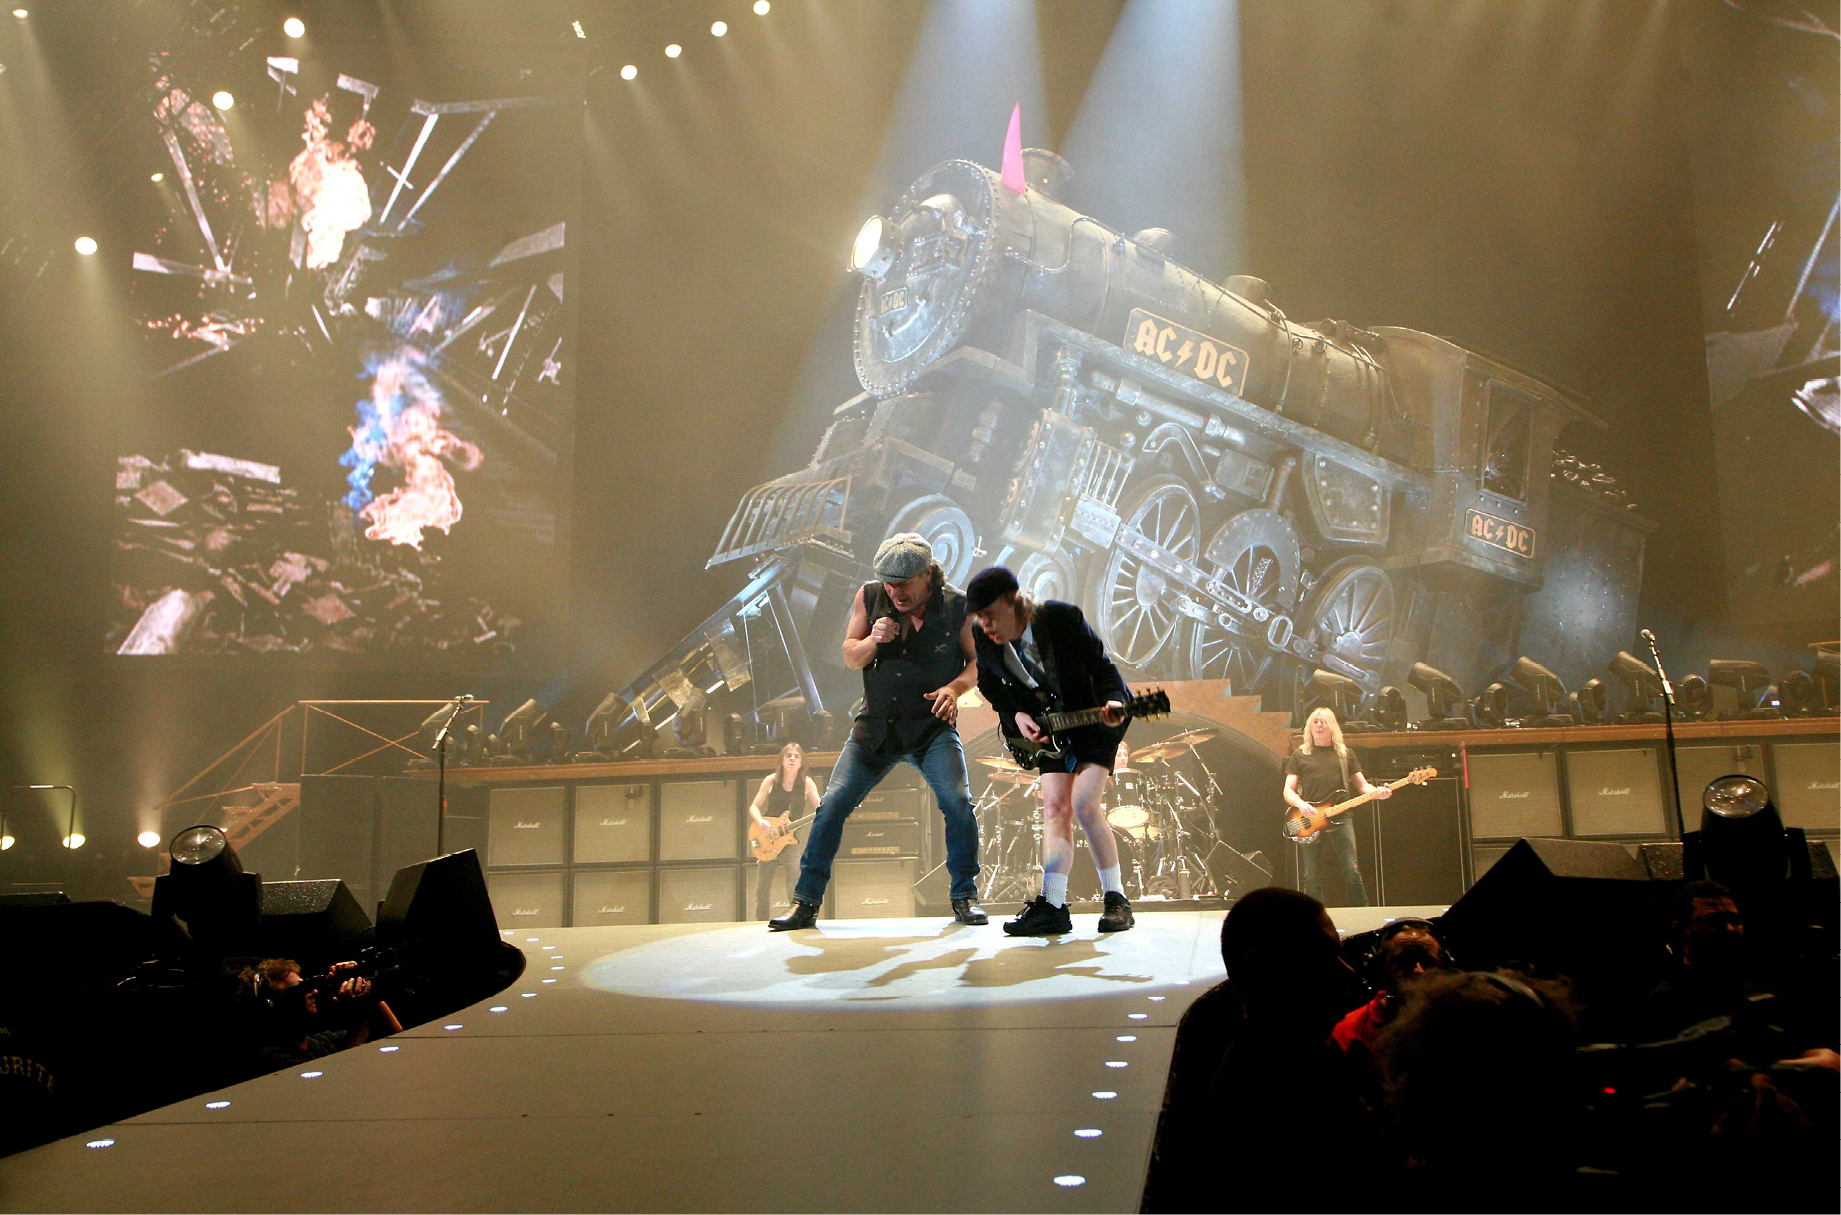 Singer Brian Johnson and Angus Young of the Australian rock band AC/DC perform in concert at the Palais Omnisport of Paris Bercy on their 'Black Ice World Tour'. Paris, FRANCE-25/02/2009.